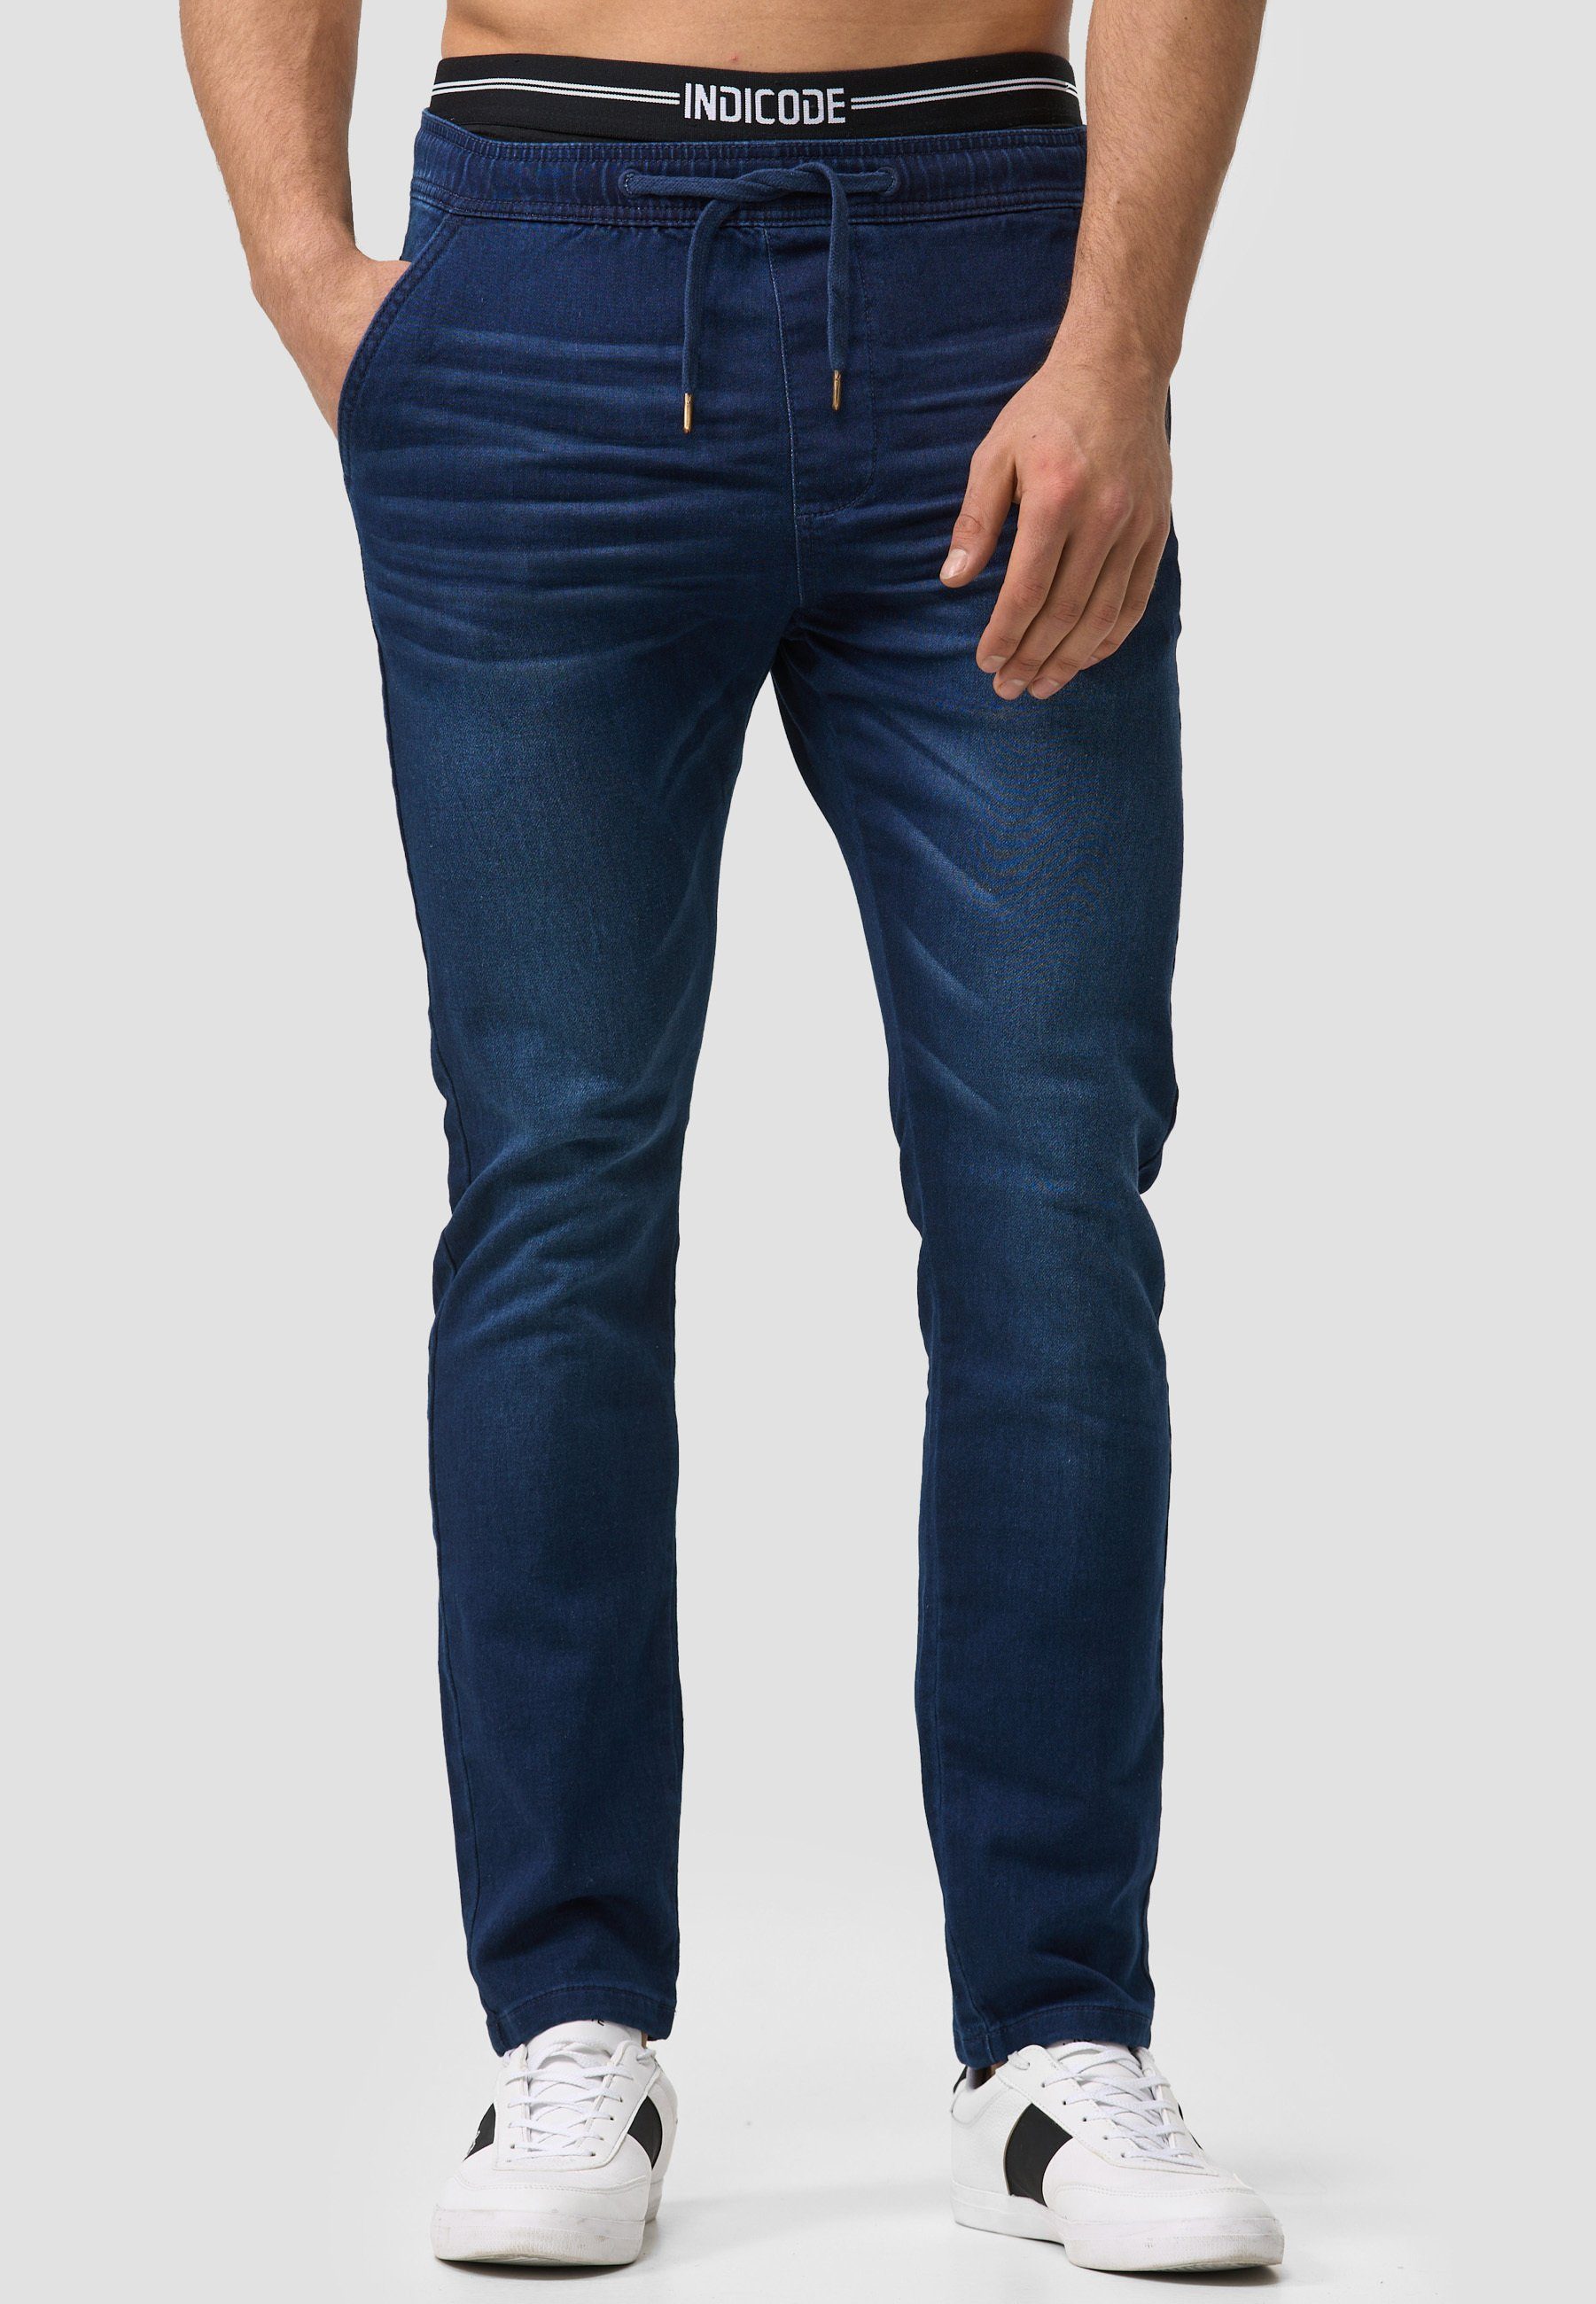 Indicode Bequeme Jeans Alban Blue | Straight-Fit Jeans